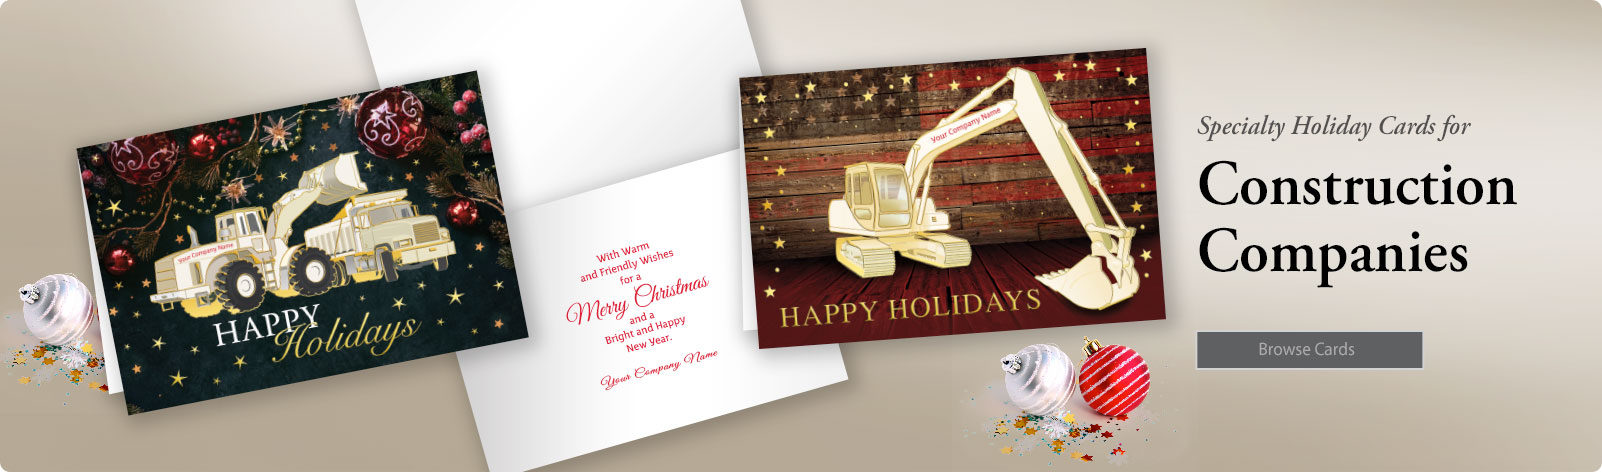 Construction-Excavating-Paving Christmas Holiday Cards!